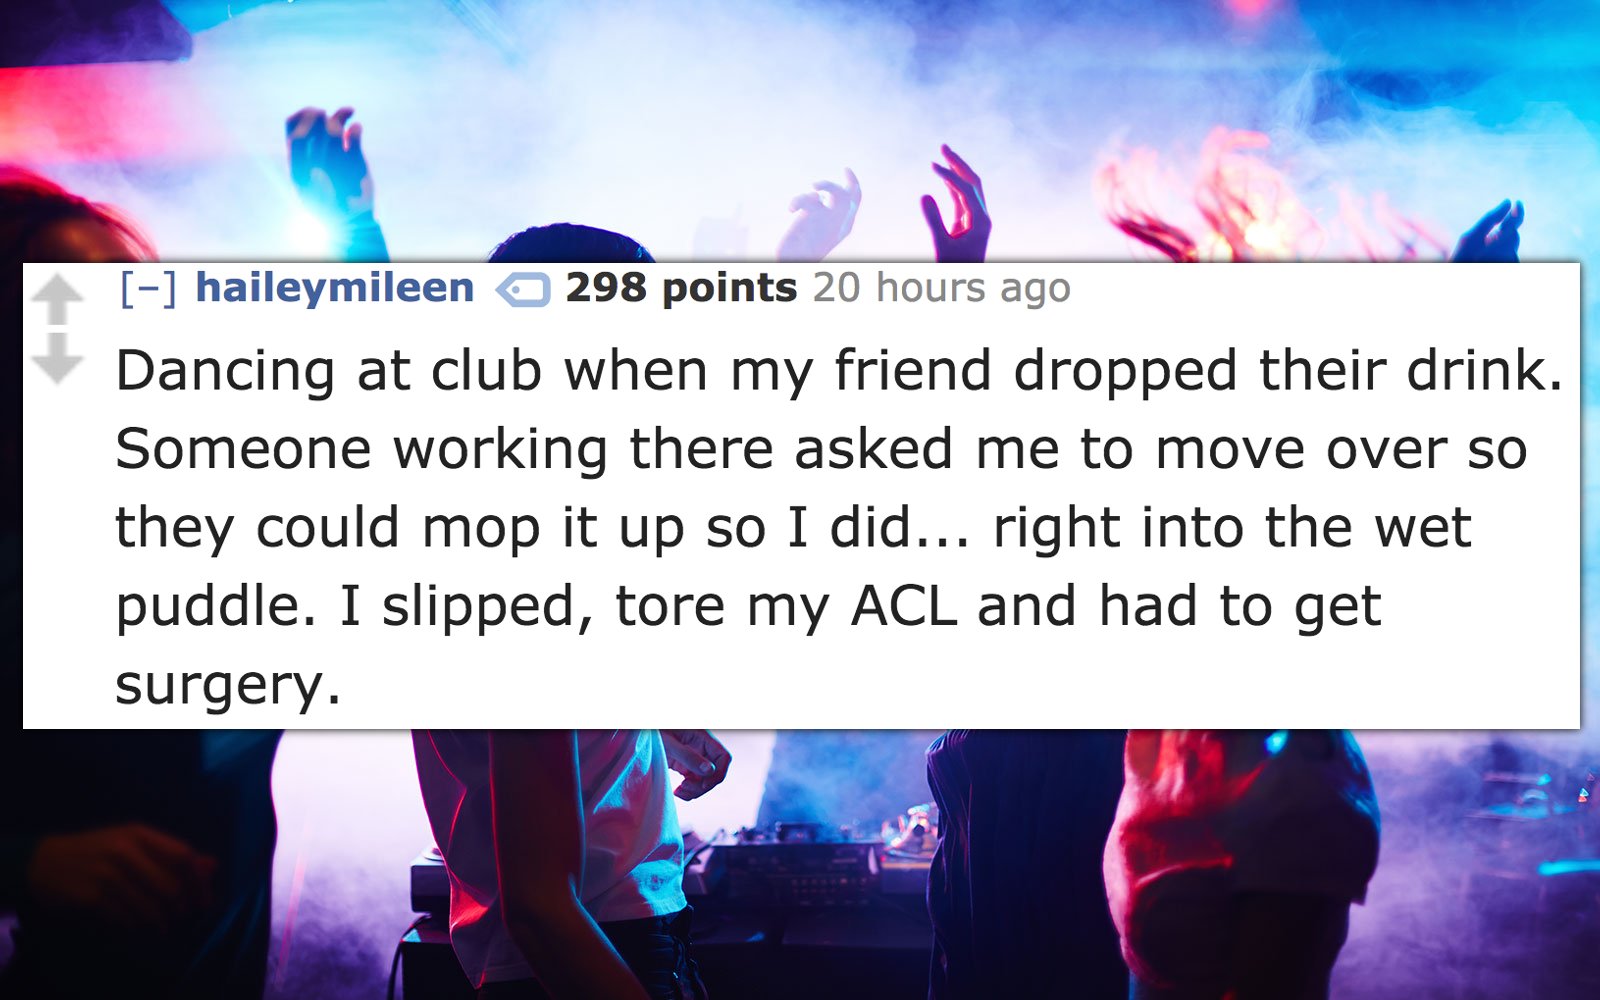 night club - haileymileen 298 points 20 hours ago Dancing at club when my friend dropped their drink. Someone working there asked me to move over so they could mop it up so I did... right into the wet puddle. I slipped, tore my Acl and had to get surgery.